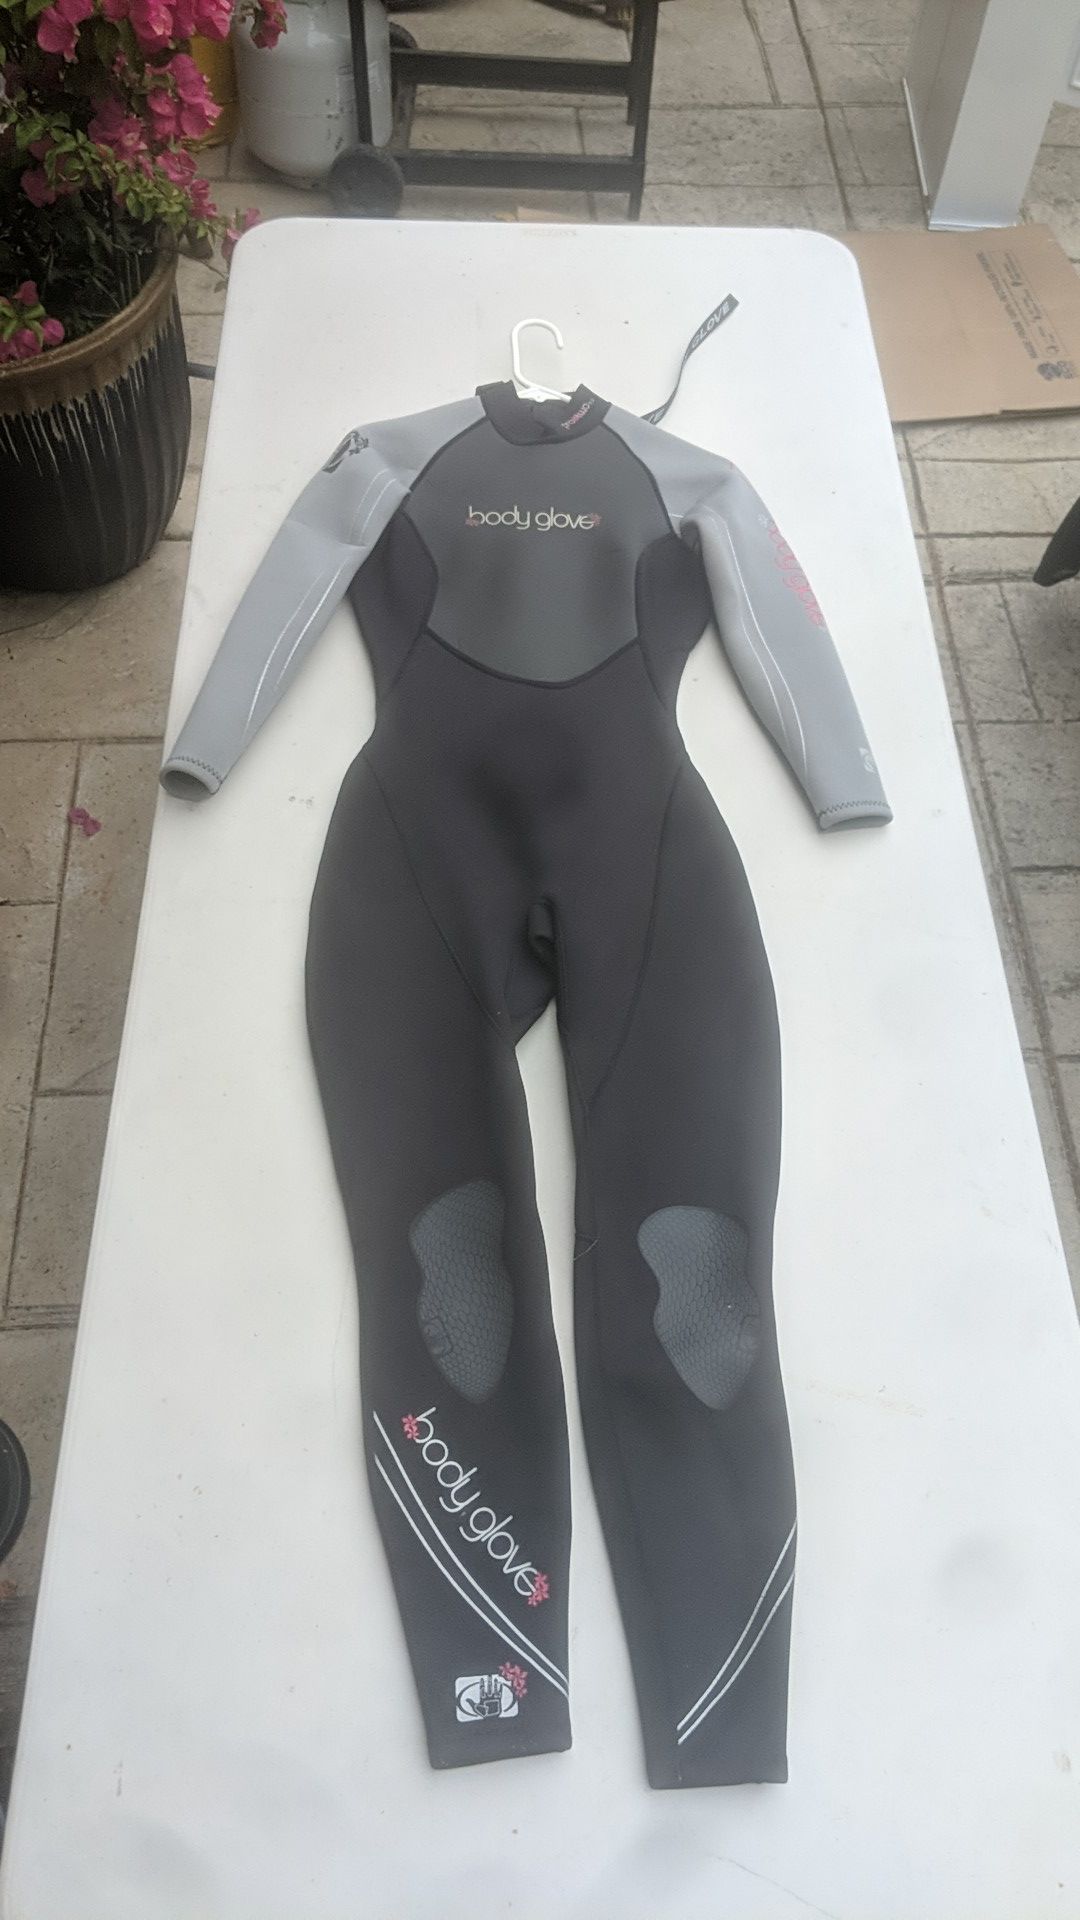 Body Glove pro-two 3:2 wetsuit